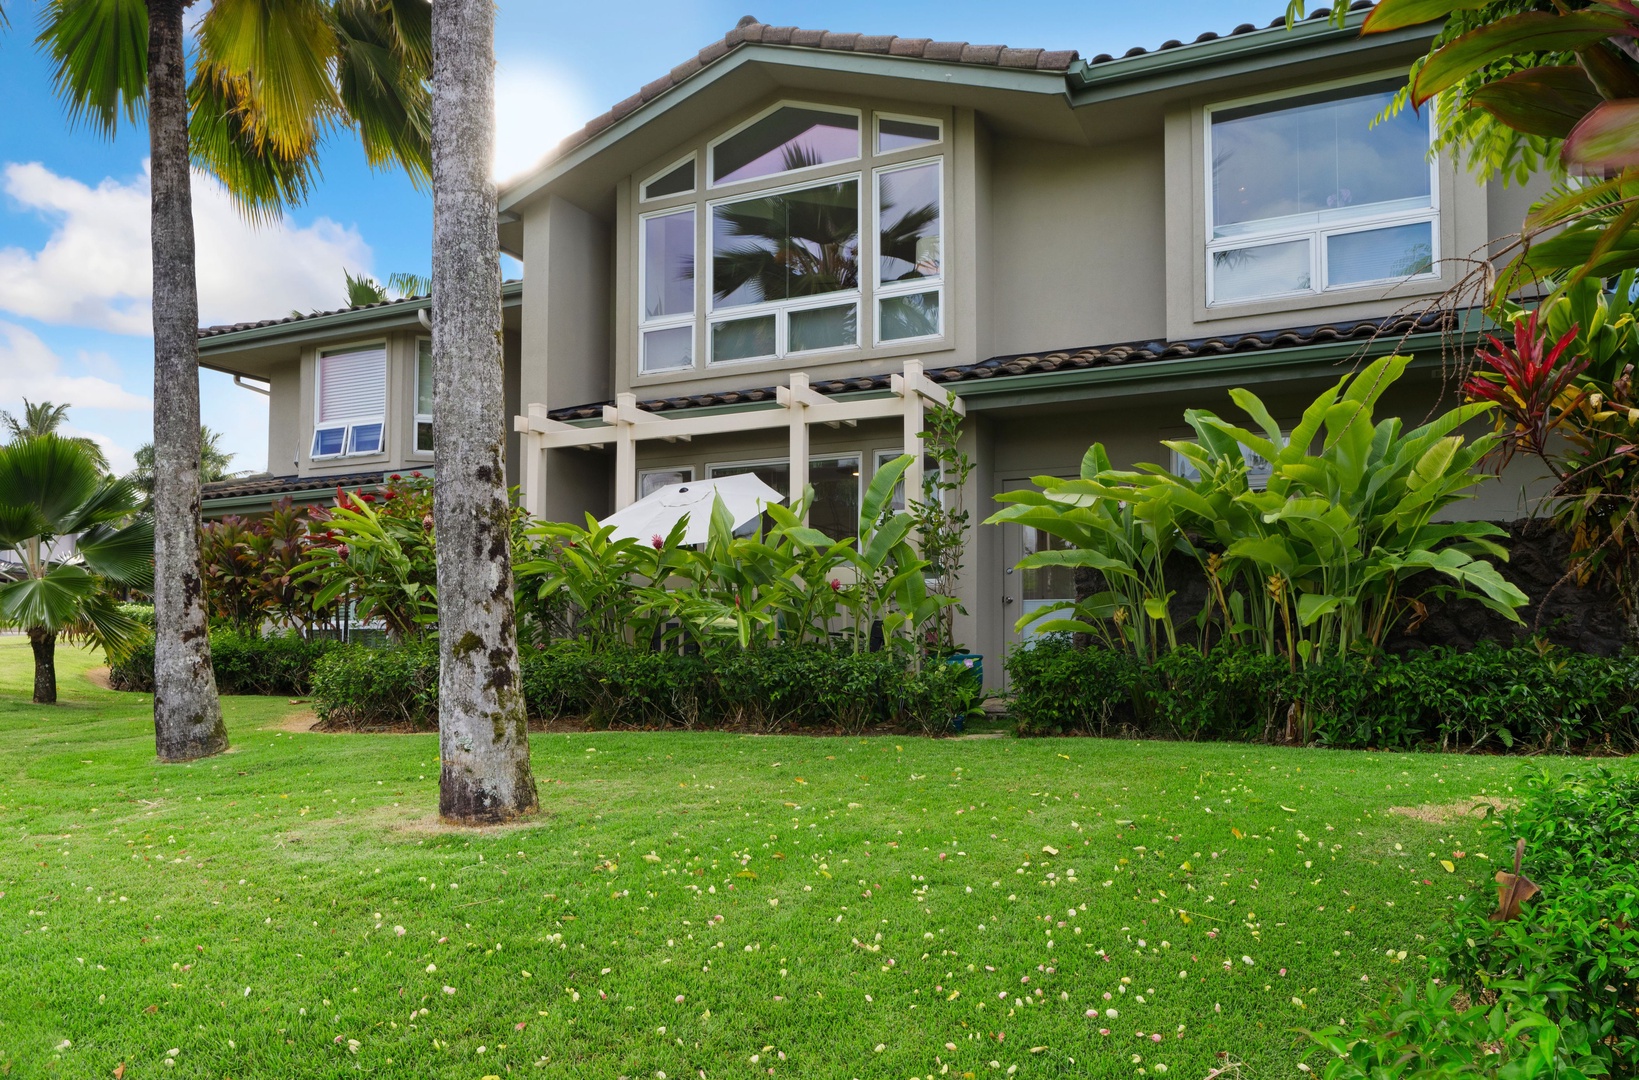 Princeville Vacation Rentals, Tropical Elegance - A perfect spot for intimate Gatherings